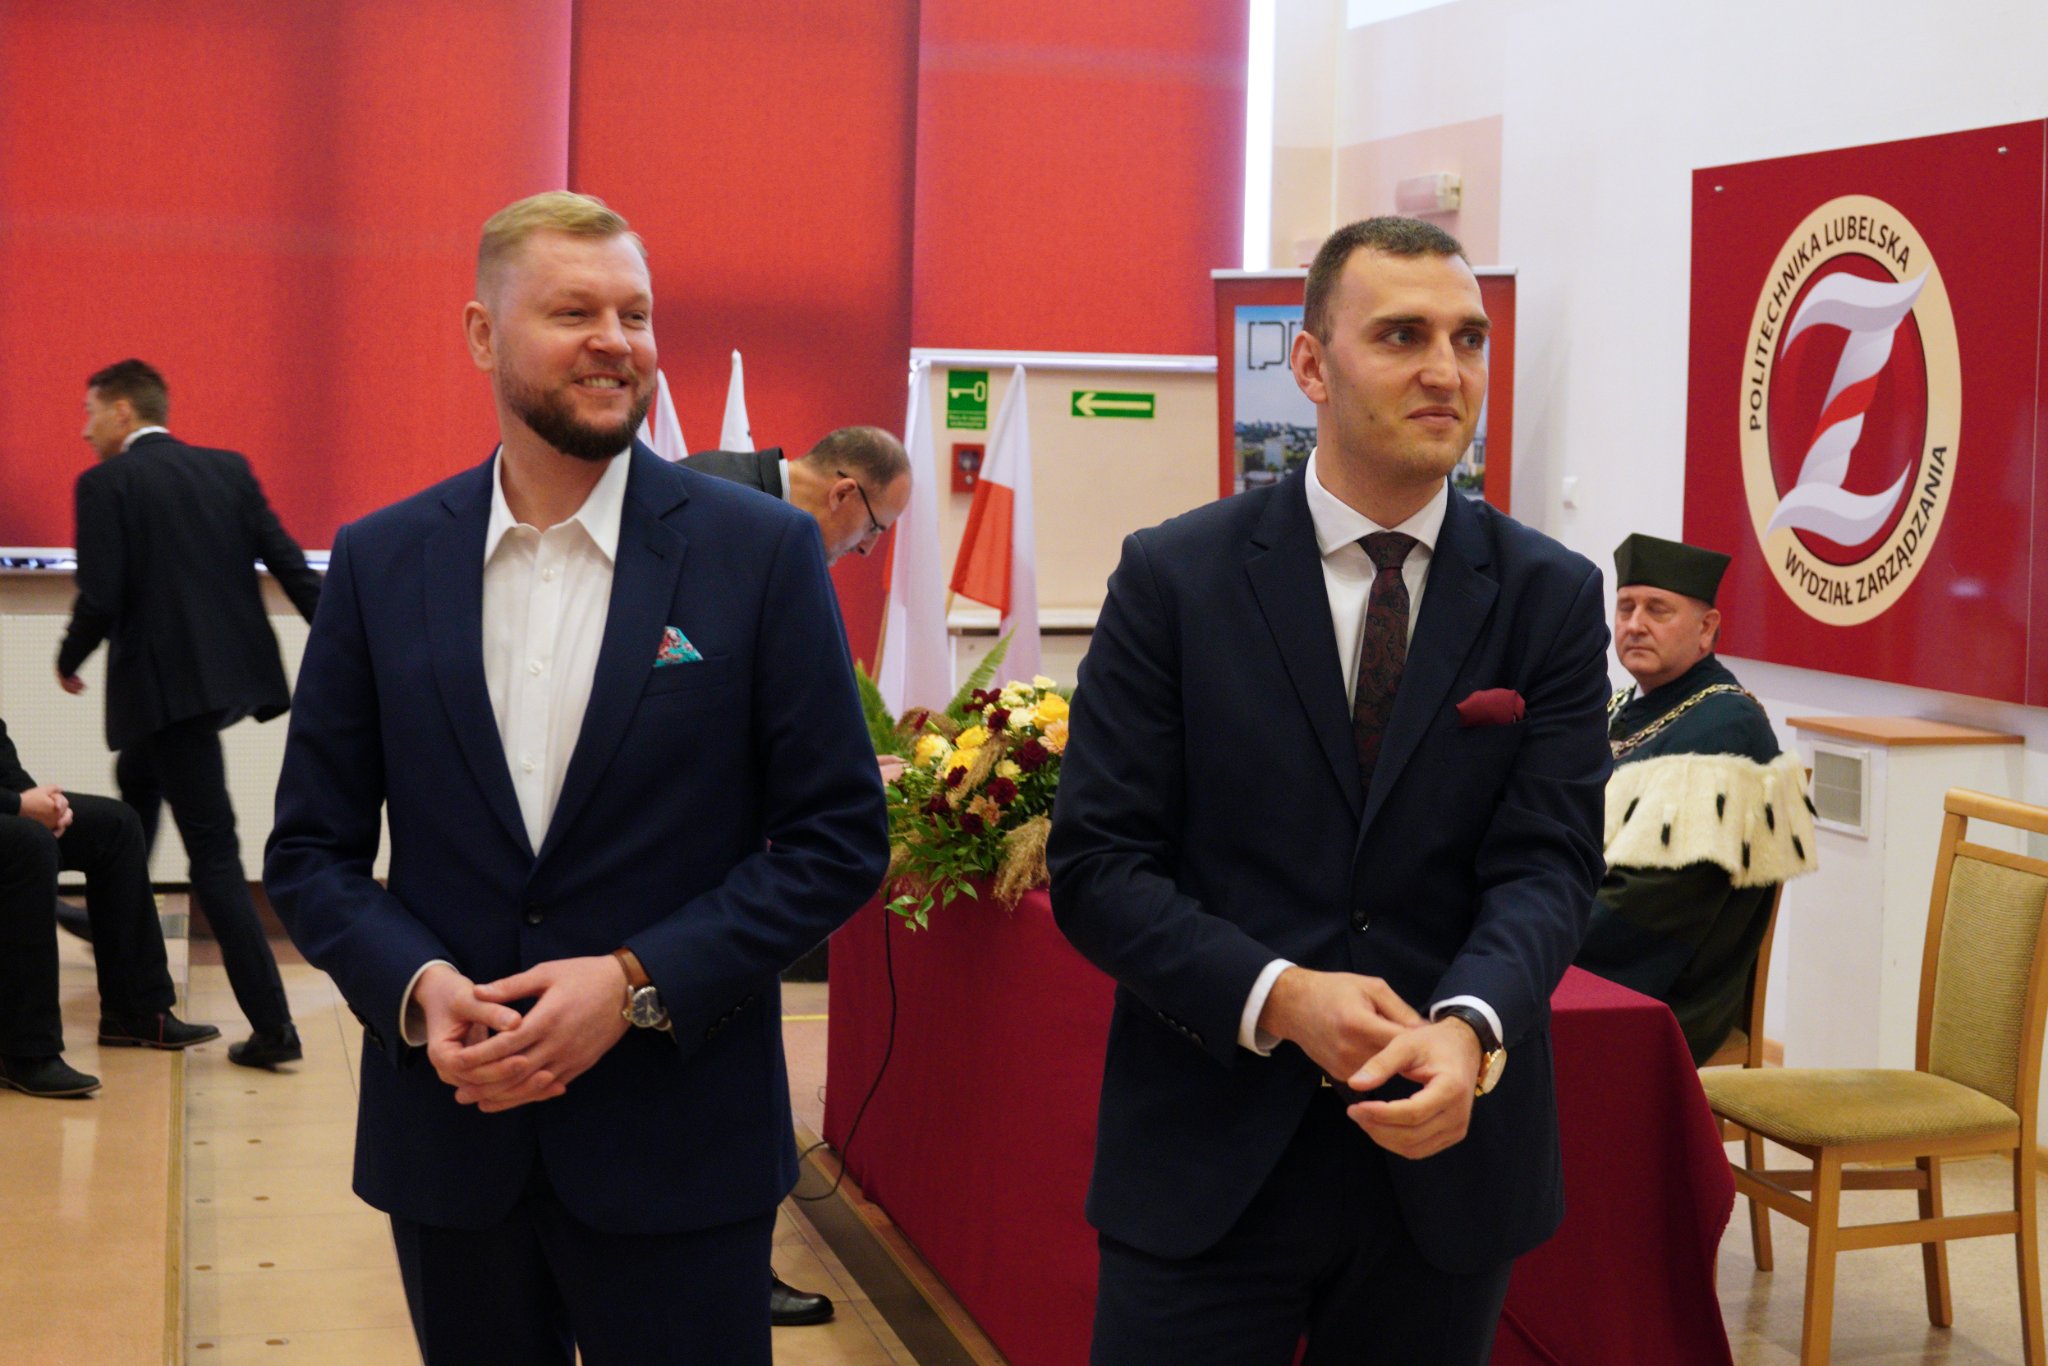 Bartłomiej Gęca on the left and Marcin Ławecki on the right at the Lublin University of Technology academic year inauguration